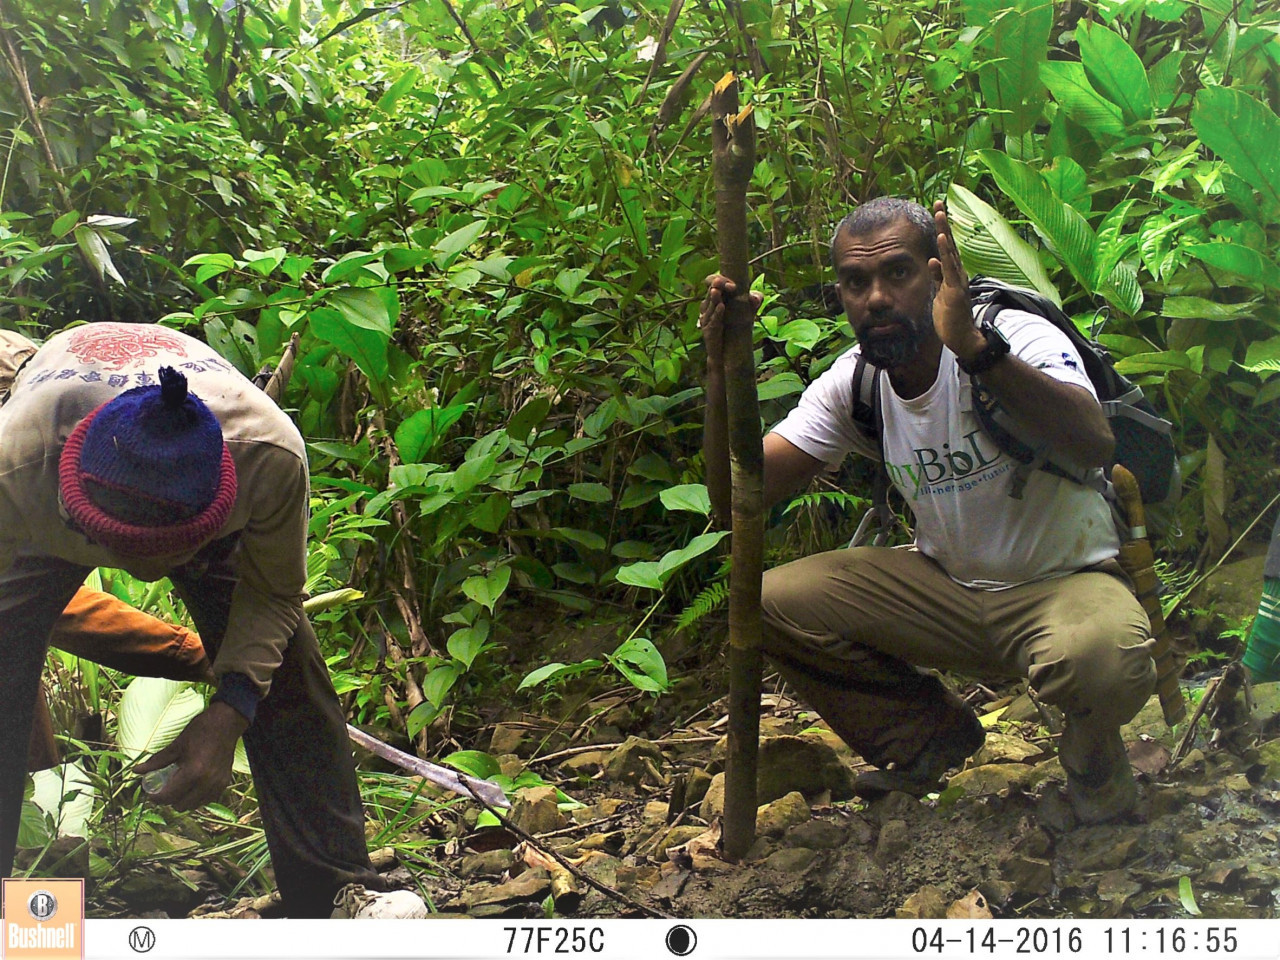 Assoc Prof Mohd Azlan Jayasilan (R) with a team member preparing to install a camera trap in the jungles of Baram. – Pic by Assoc Prof Mohd Azlan Jayasilan